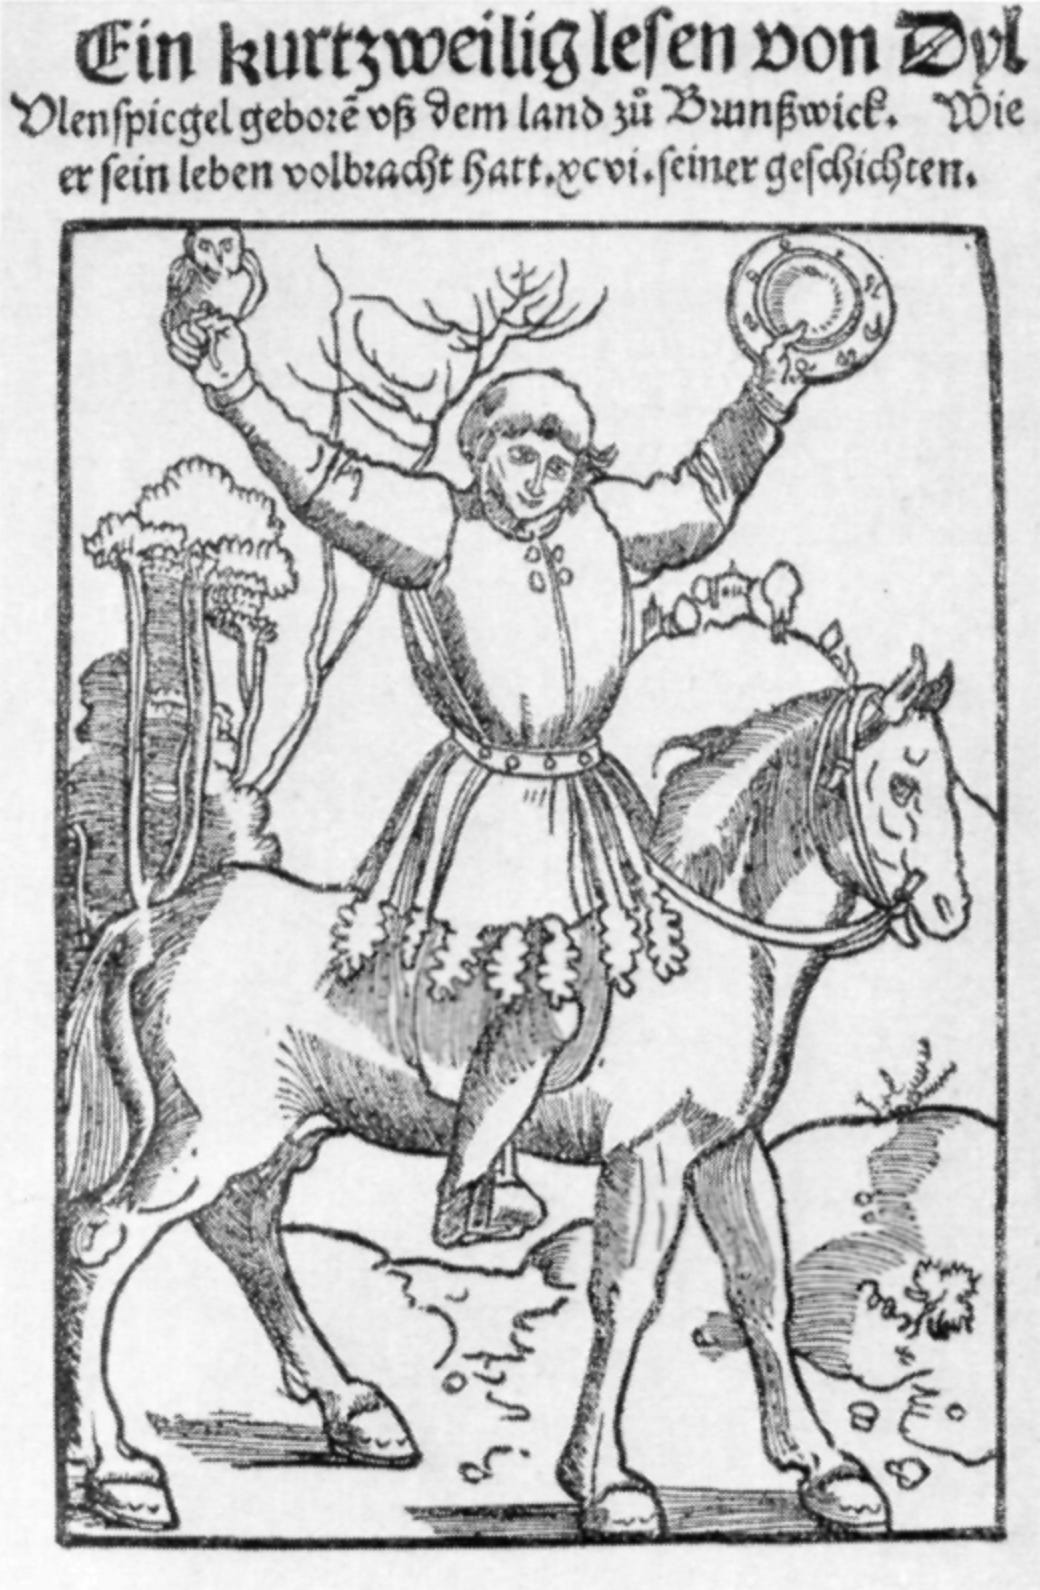 Cover image from Till Eulenspiegel dating back to the 1500s.